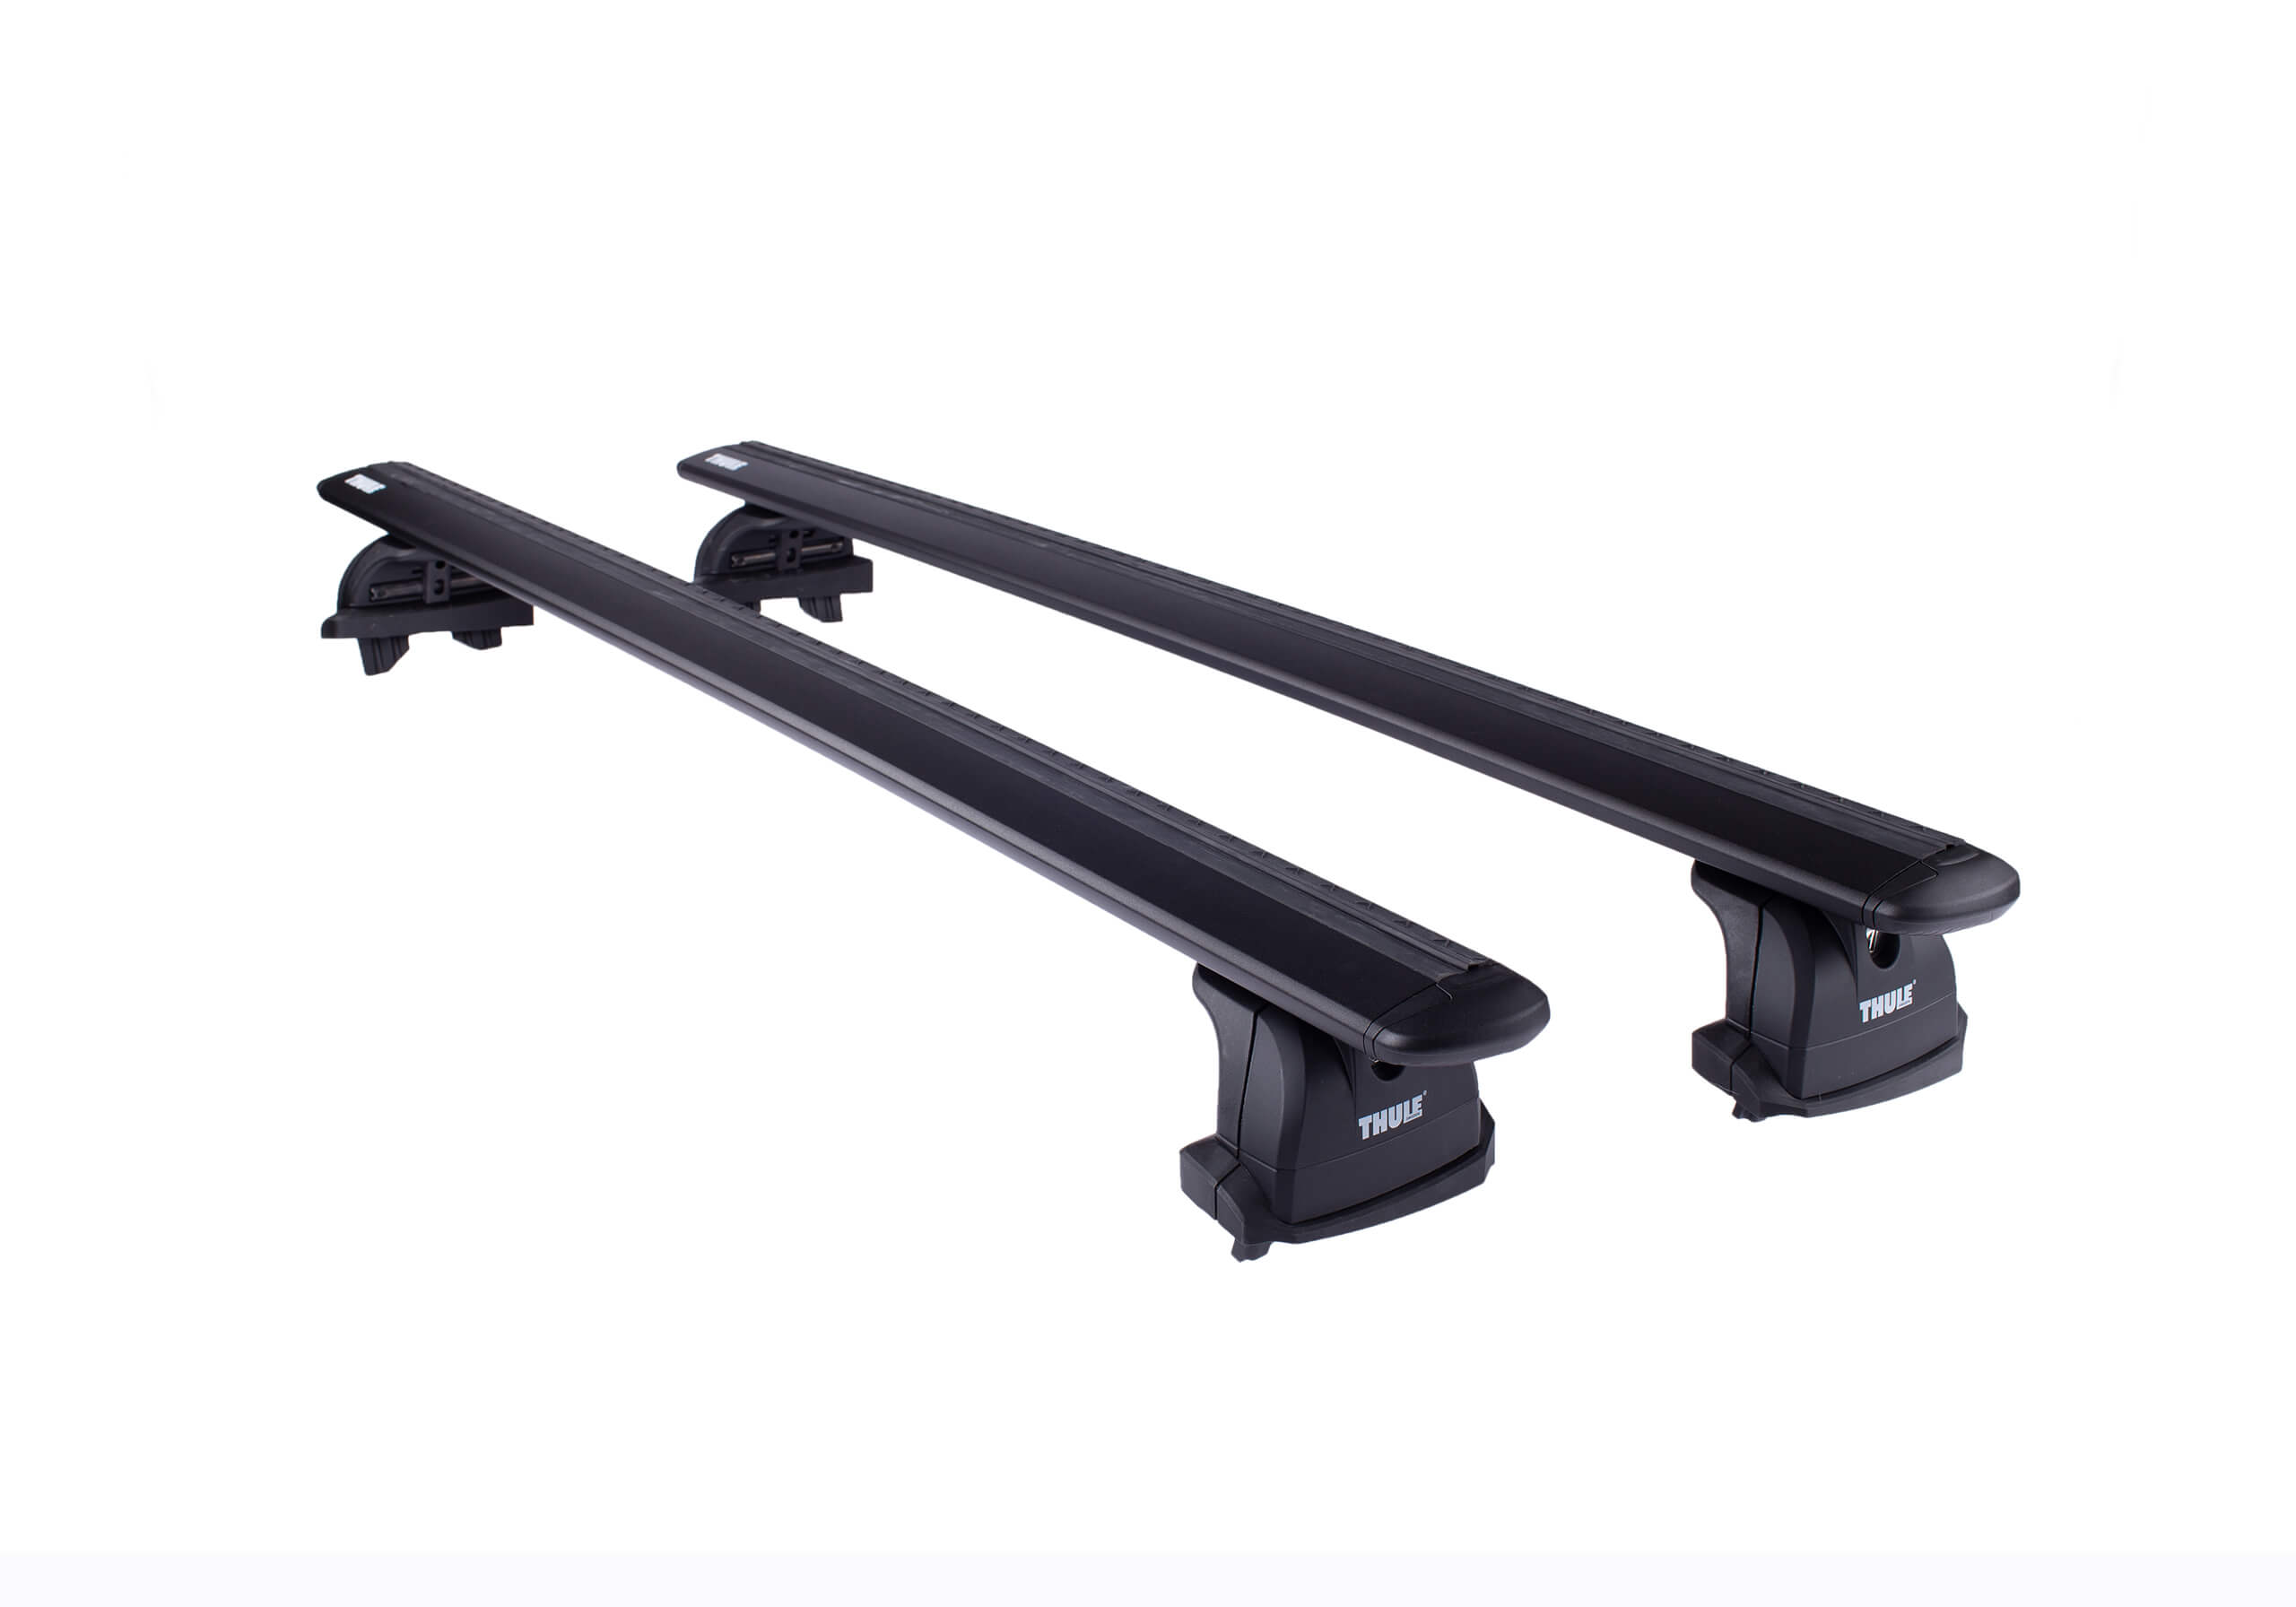 BMW 4 series coupe (2013 to 2020):Thule black WingBars package - 753, 7112B, 3028